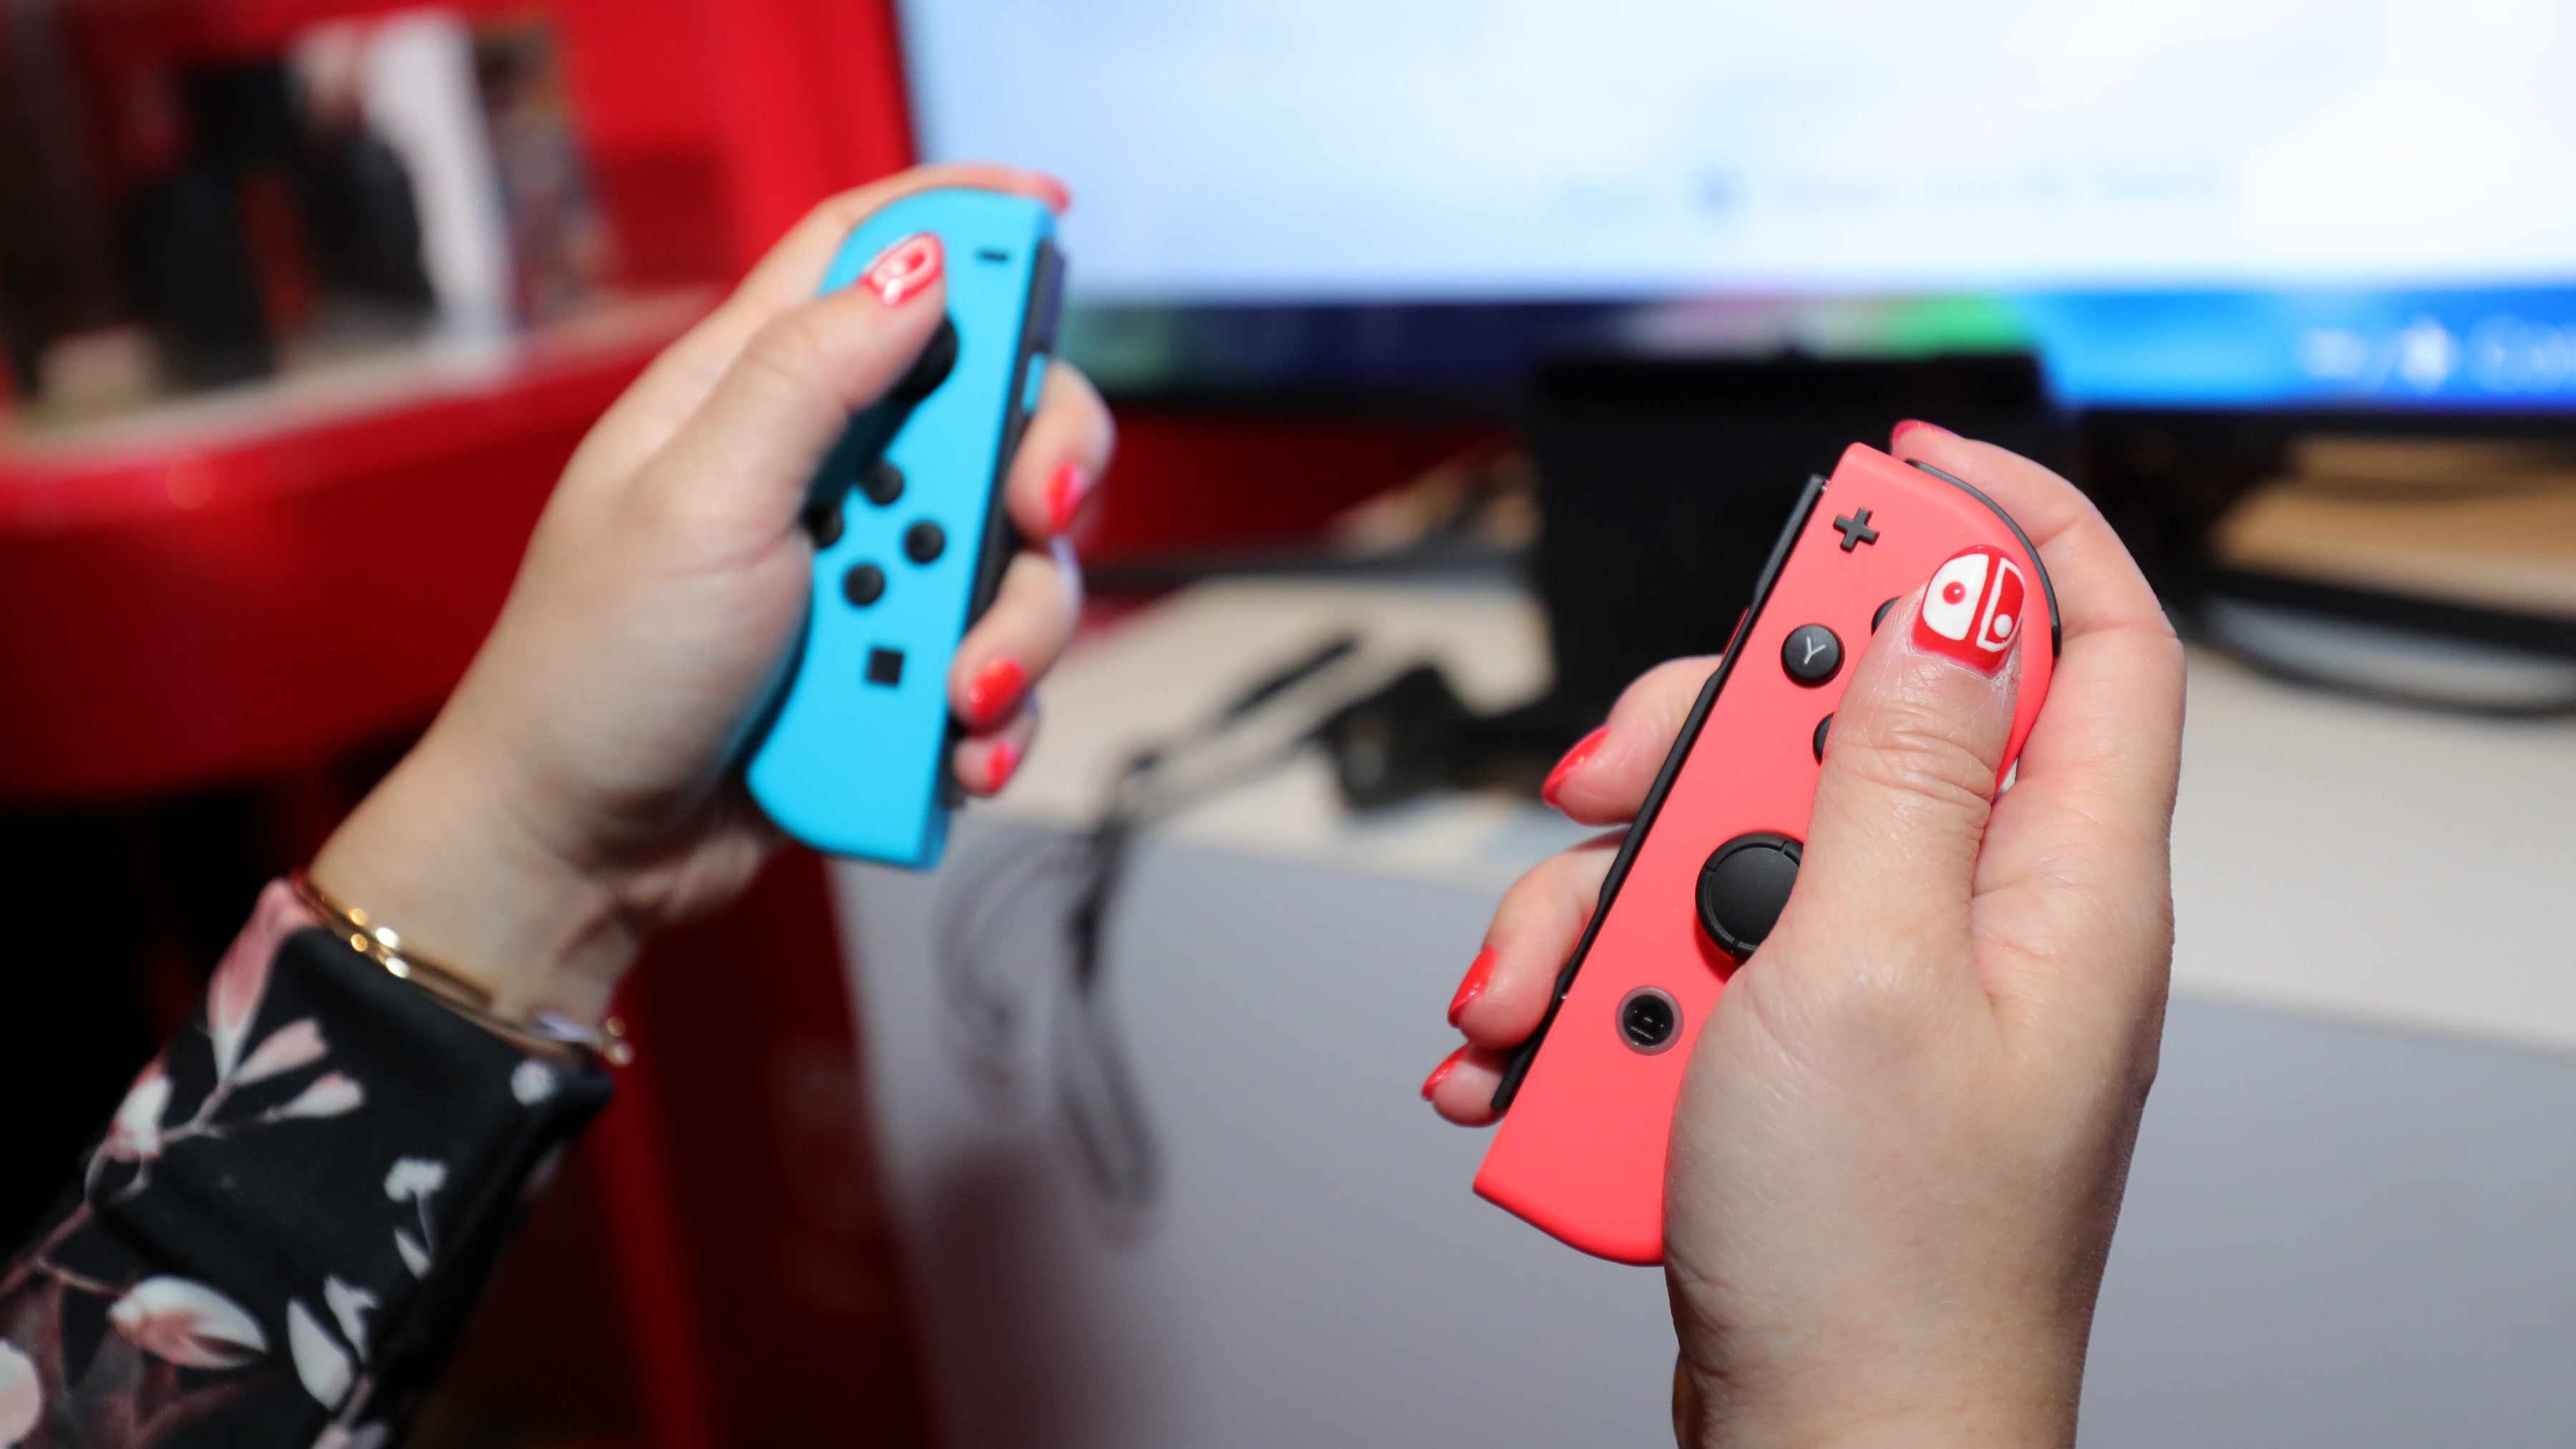 Switch Owners Share Horror Stories Of Trying To Fix Joy-Con Drift